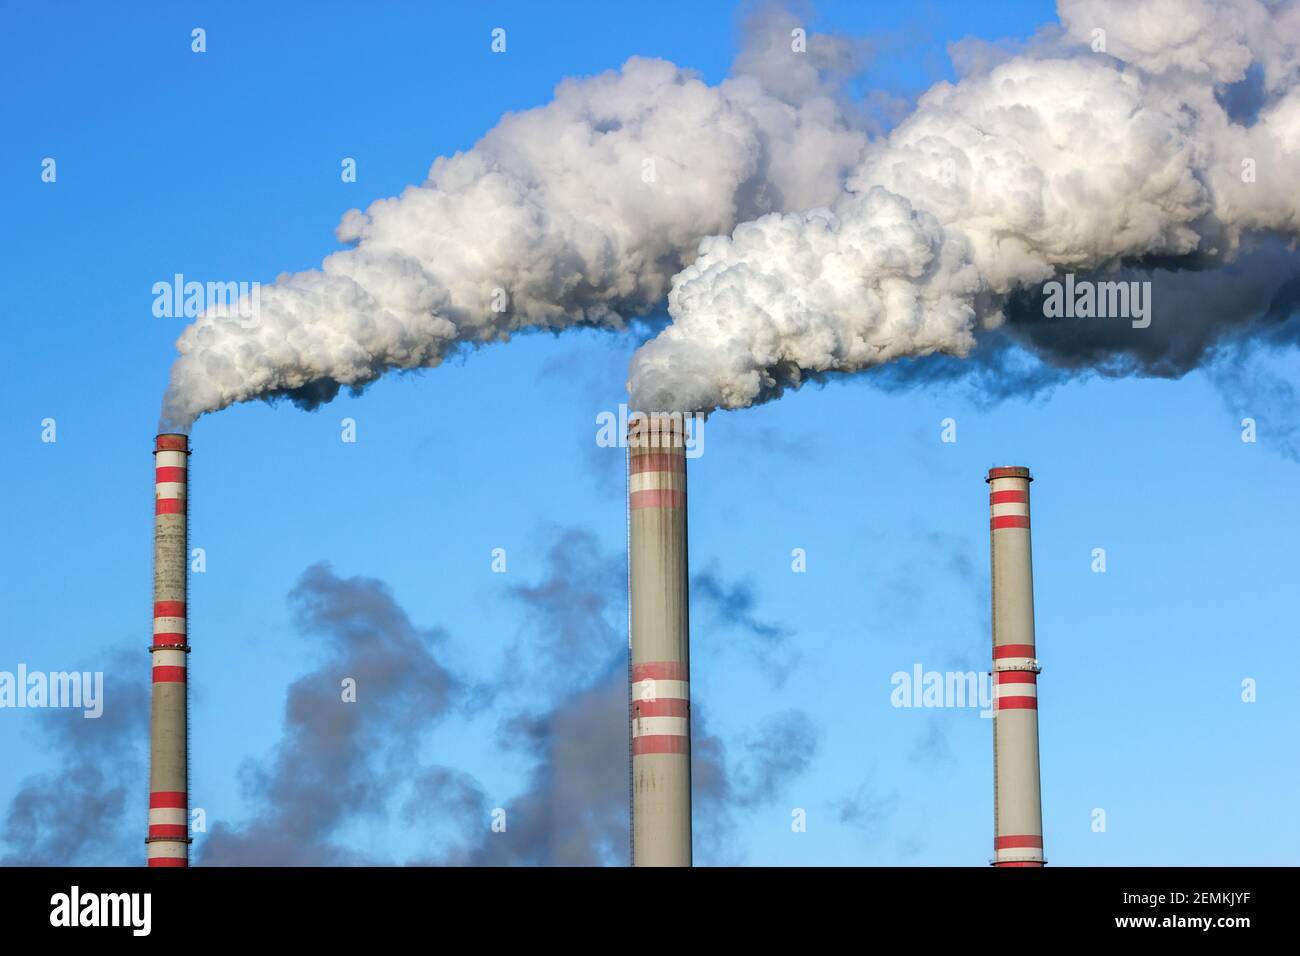 Air pollution from a coal power plant Stock Photo